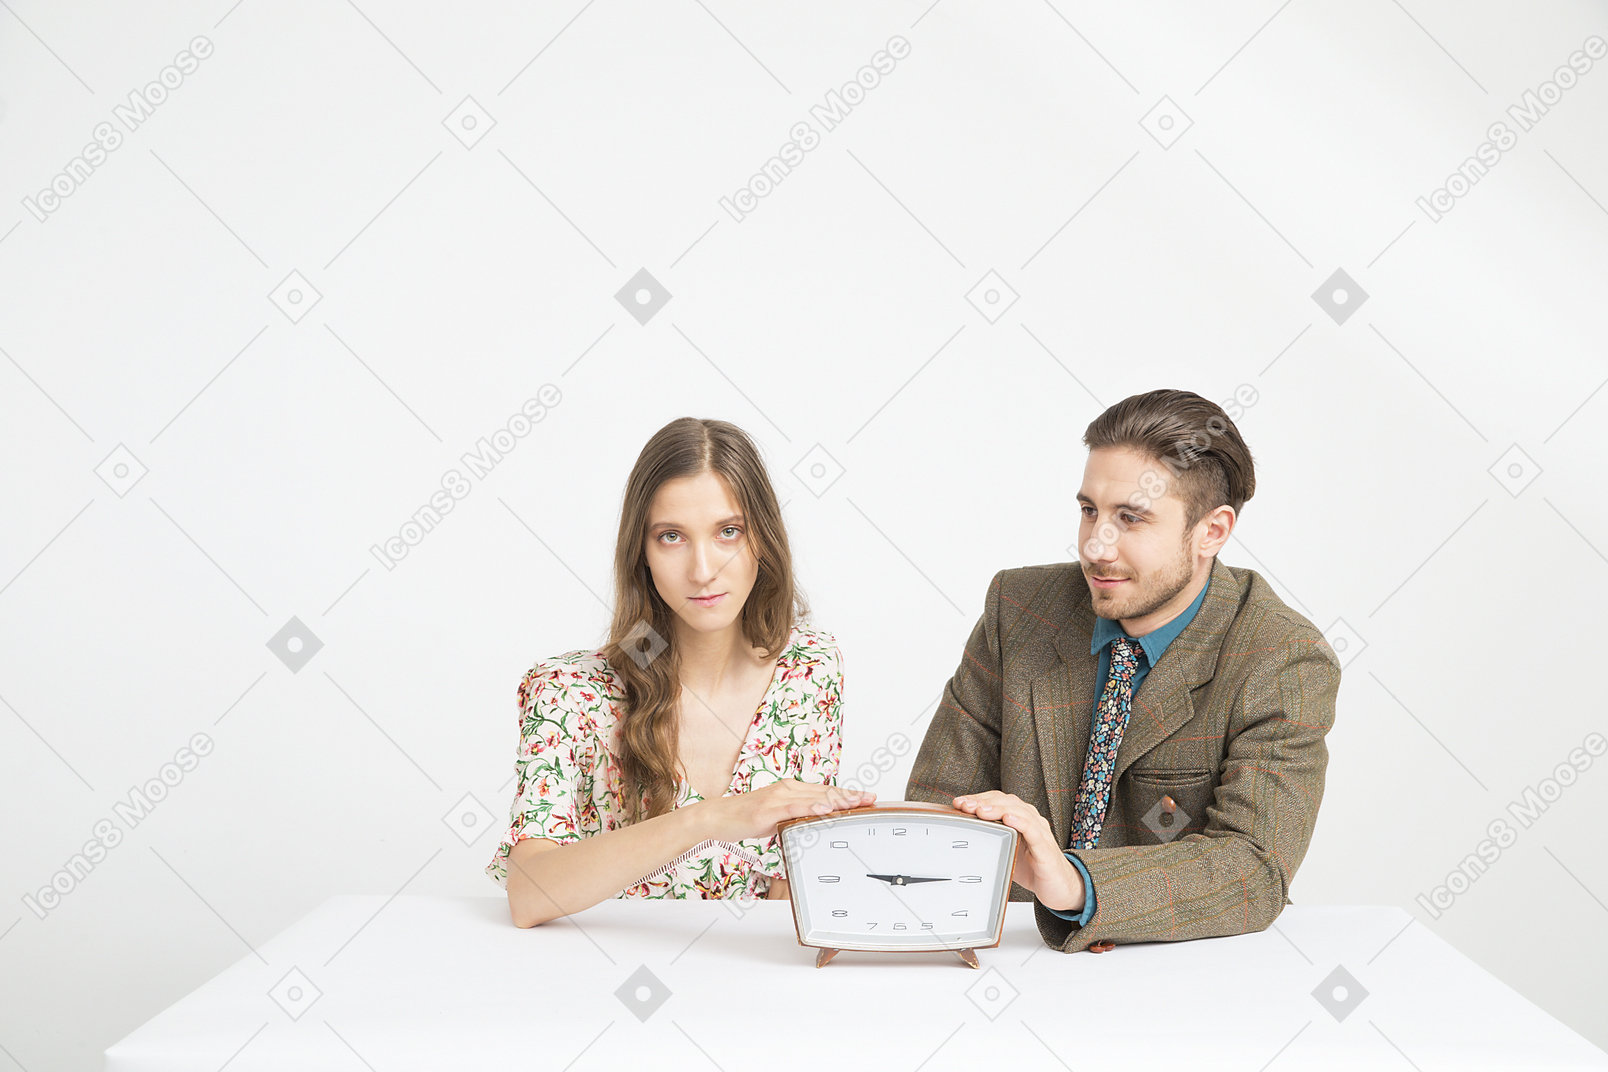 Couple sitting at the table and holding a clock